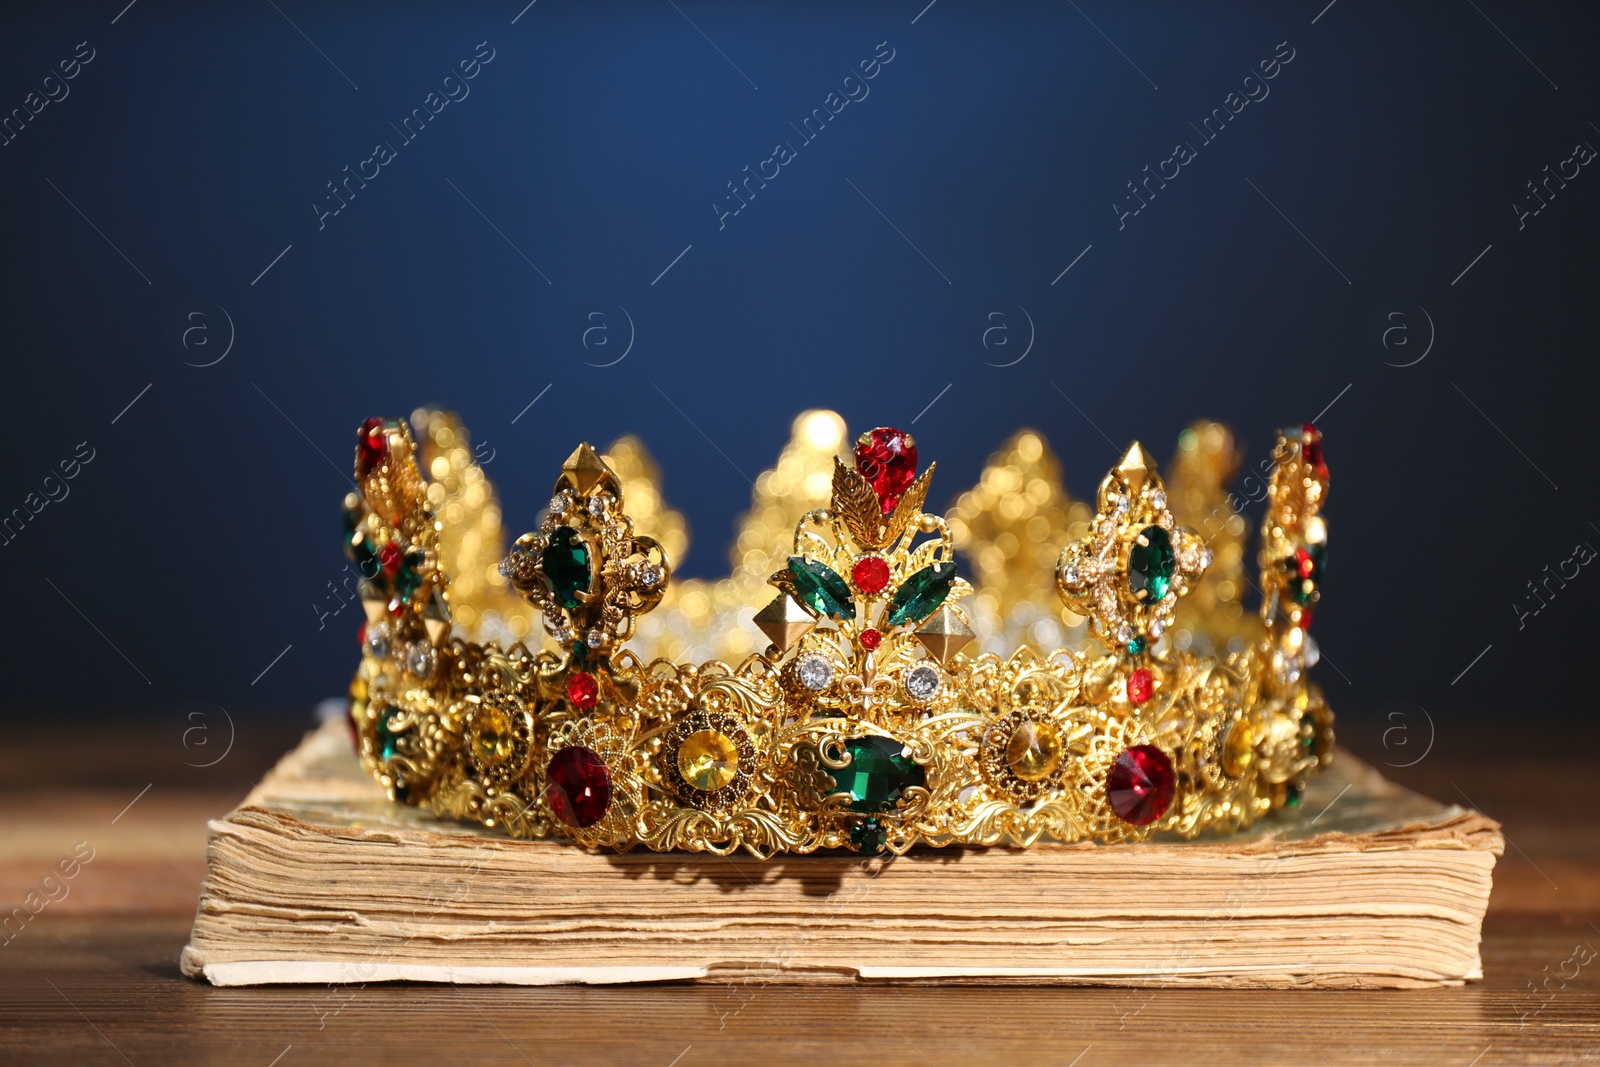 Photo of Beautiful golden crown on old book against dark blue background. Fantasy item